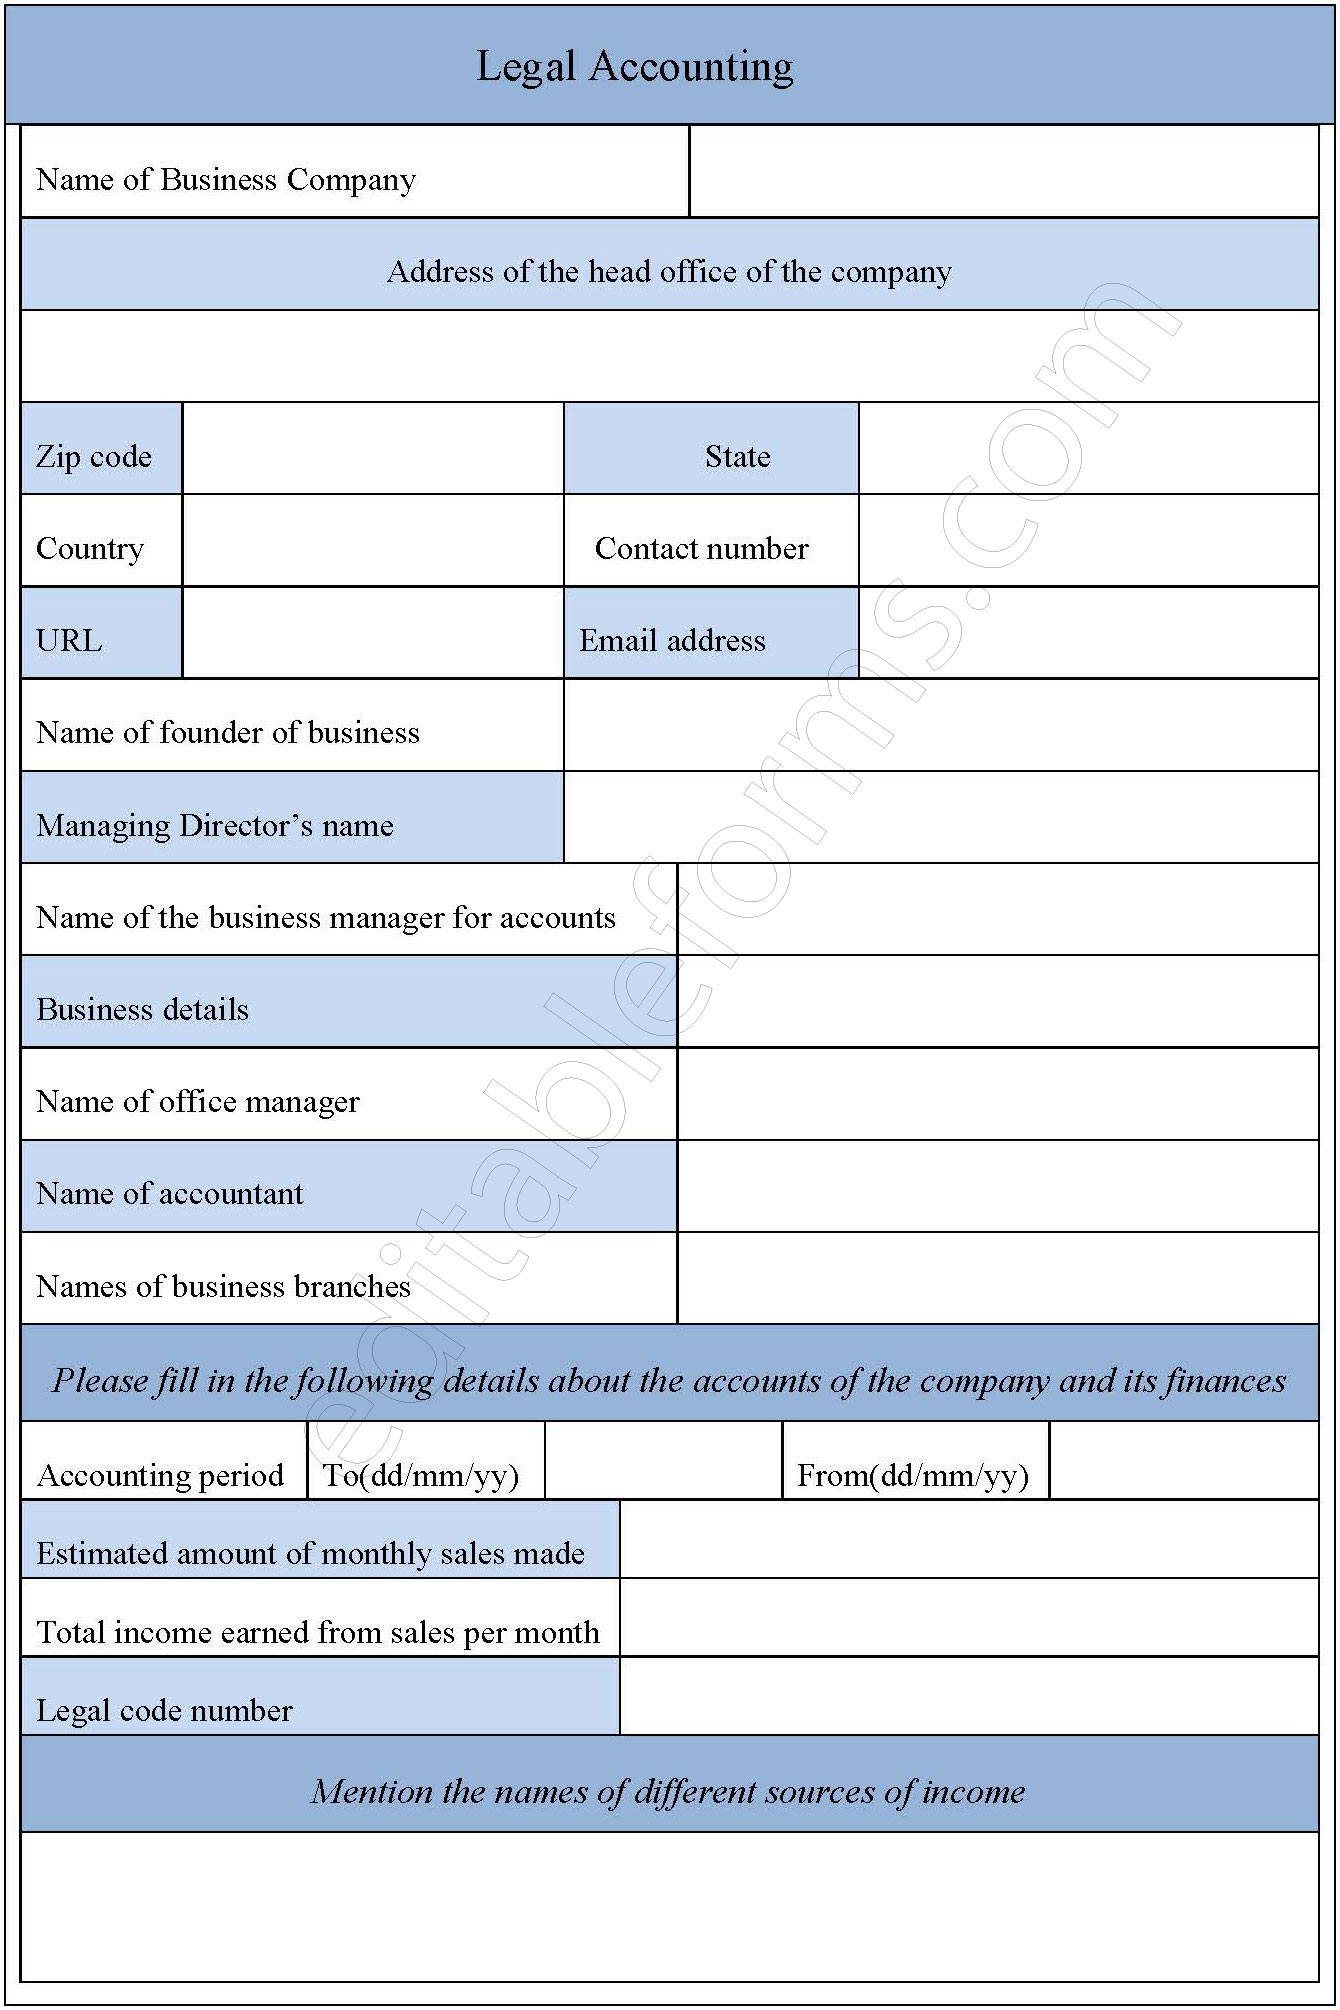 Legal Accounting Form